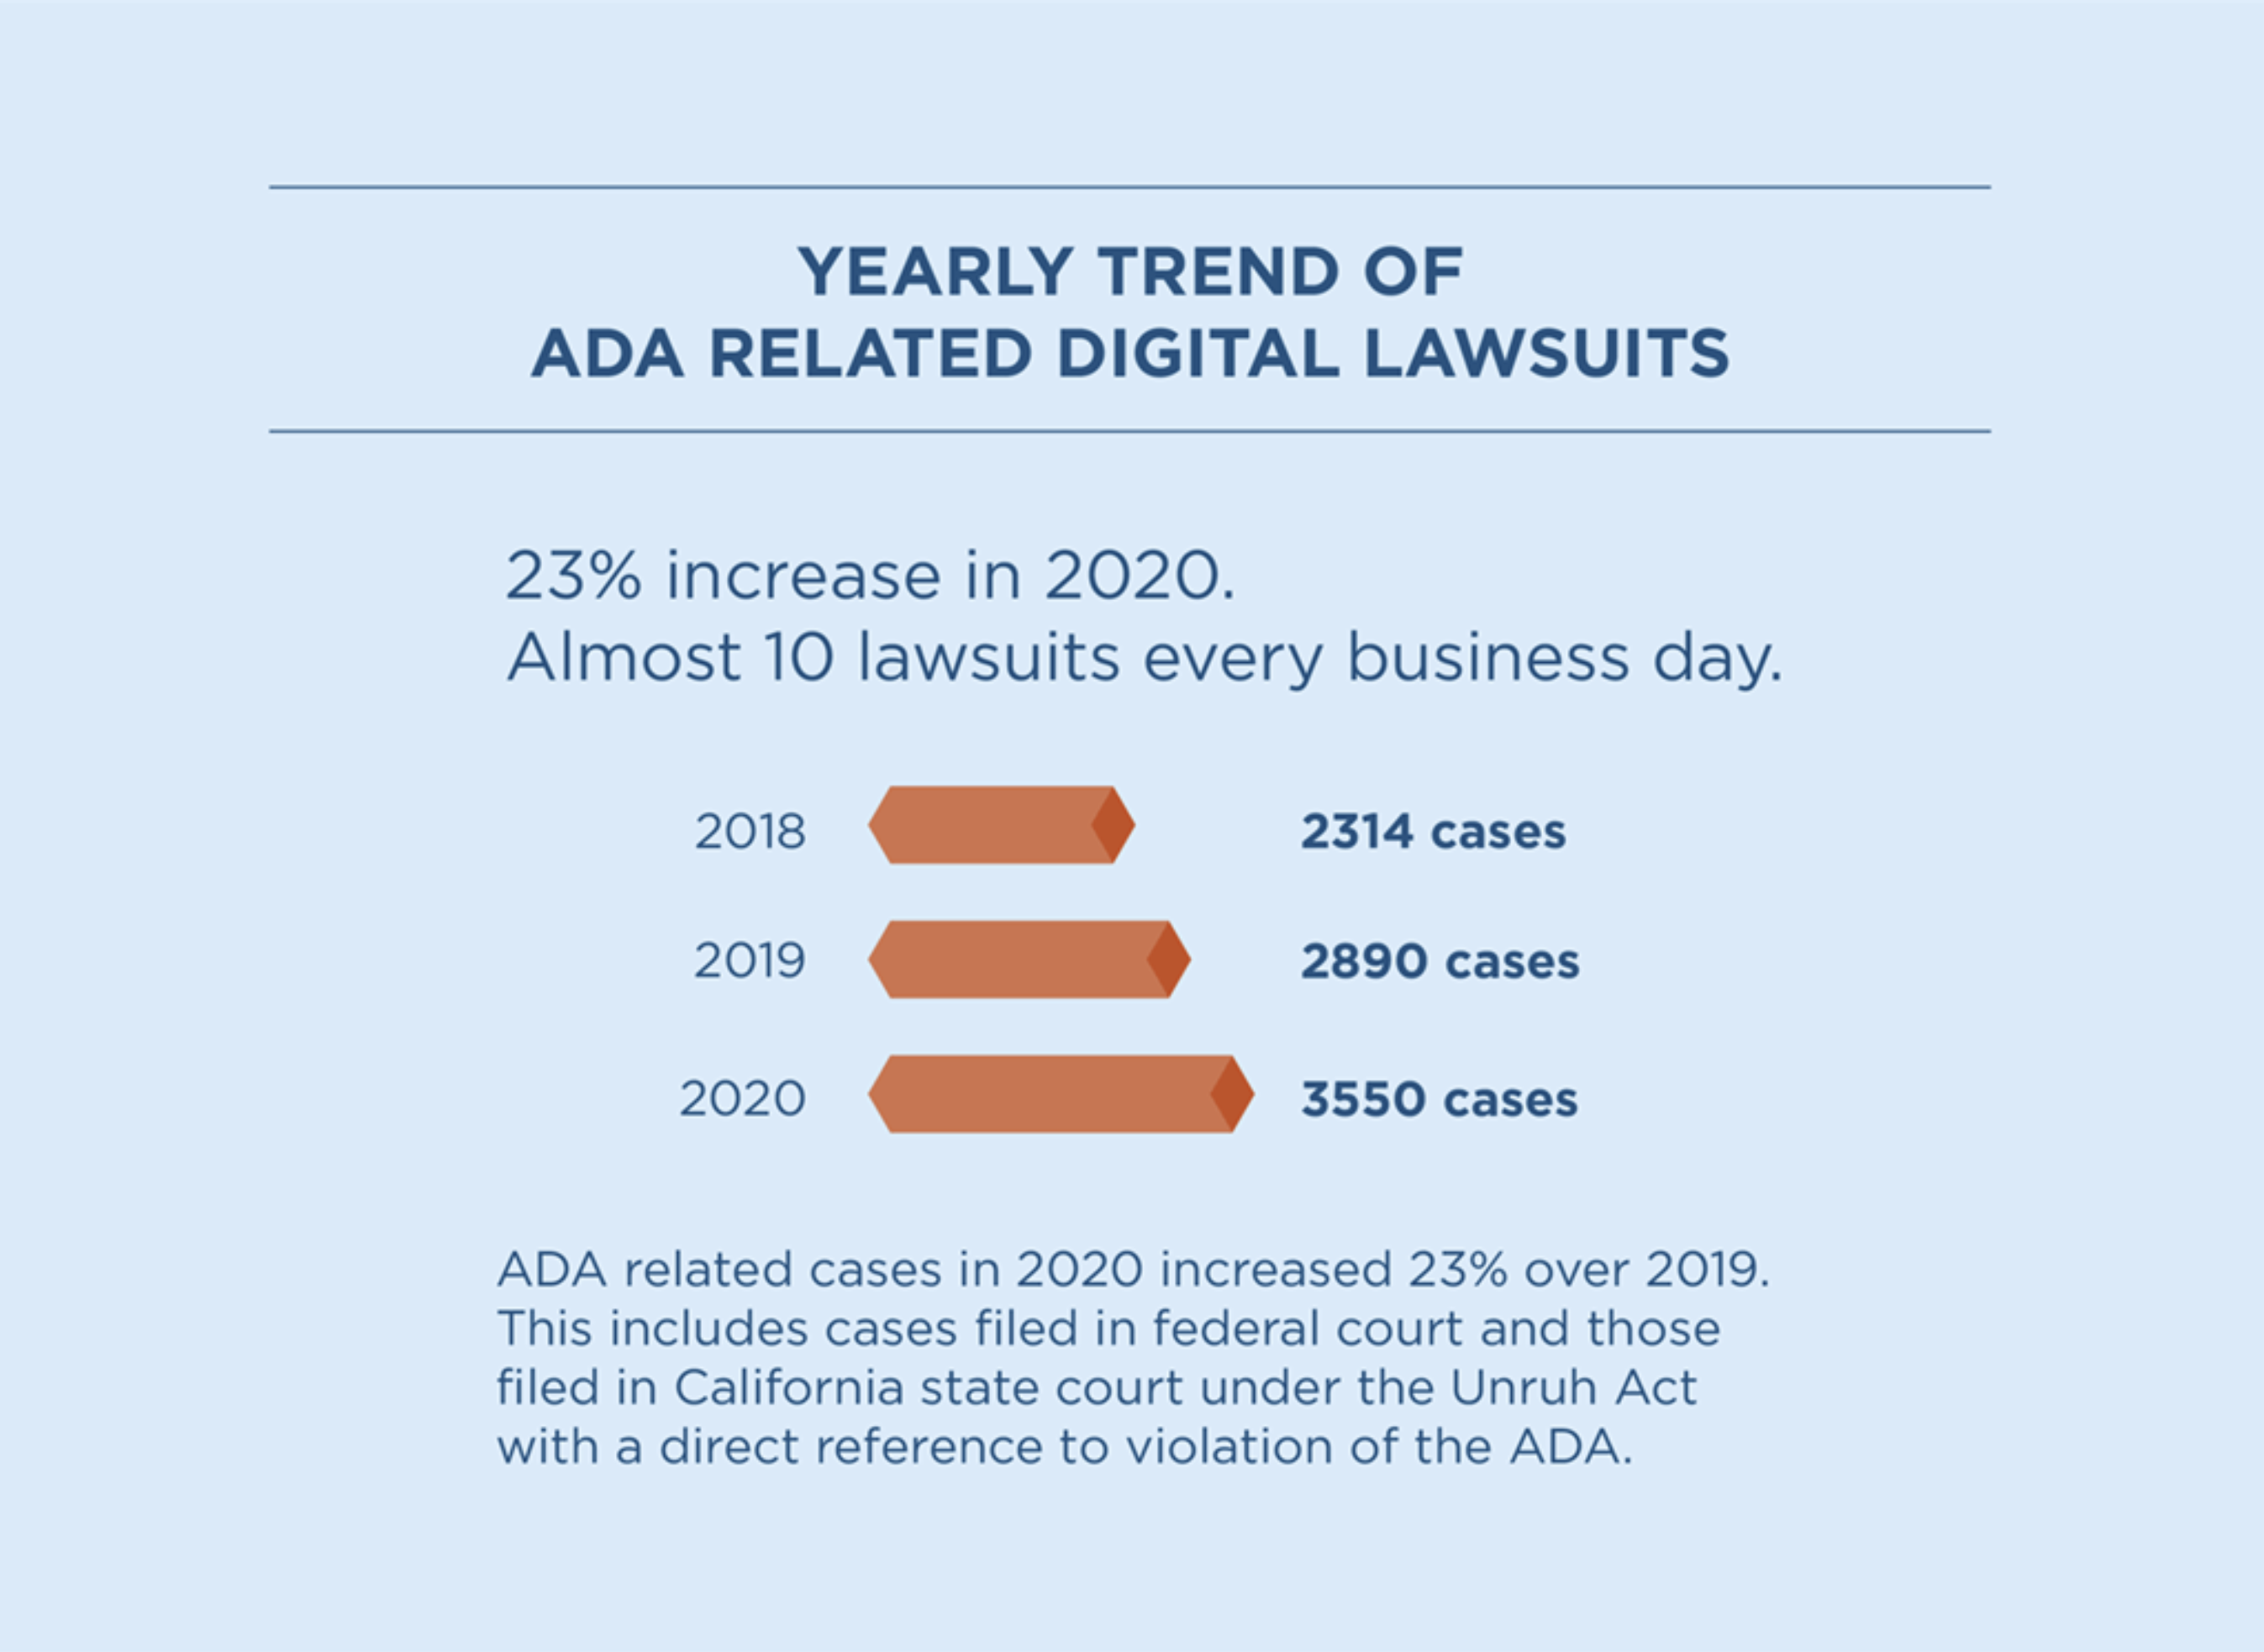 A table titled "Yearly Trend of ADA-Related Digital Lawsuits" shows a 23% increase in 2020 compared to 2019, totalling 3,550 cases (almost 10 lawsuits every business day). This includes cases filed in federal court and those filed in California state court under the Unruh Act with a direct reference to the violation of the ADA.